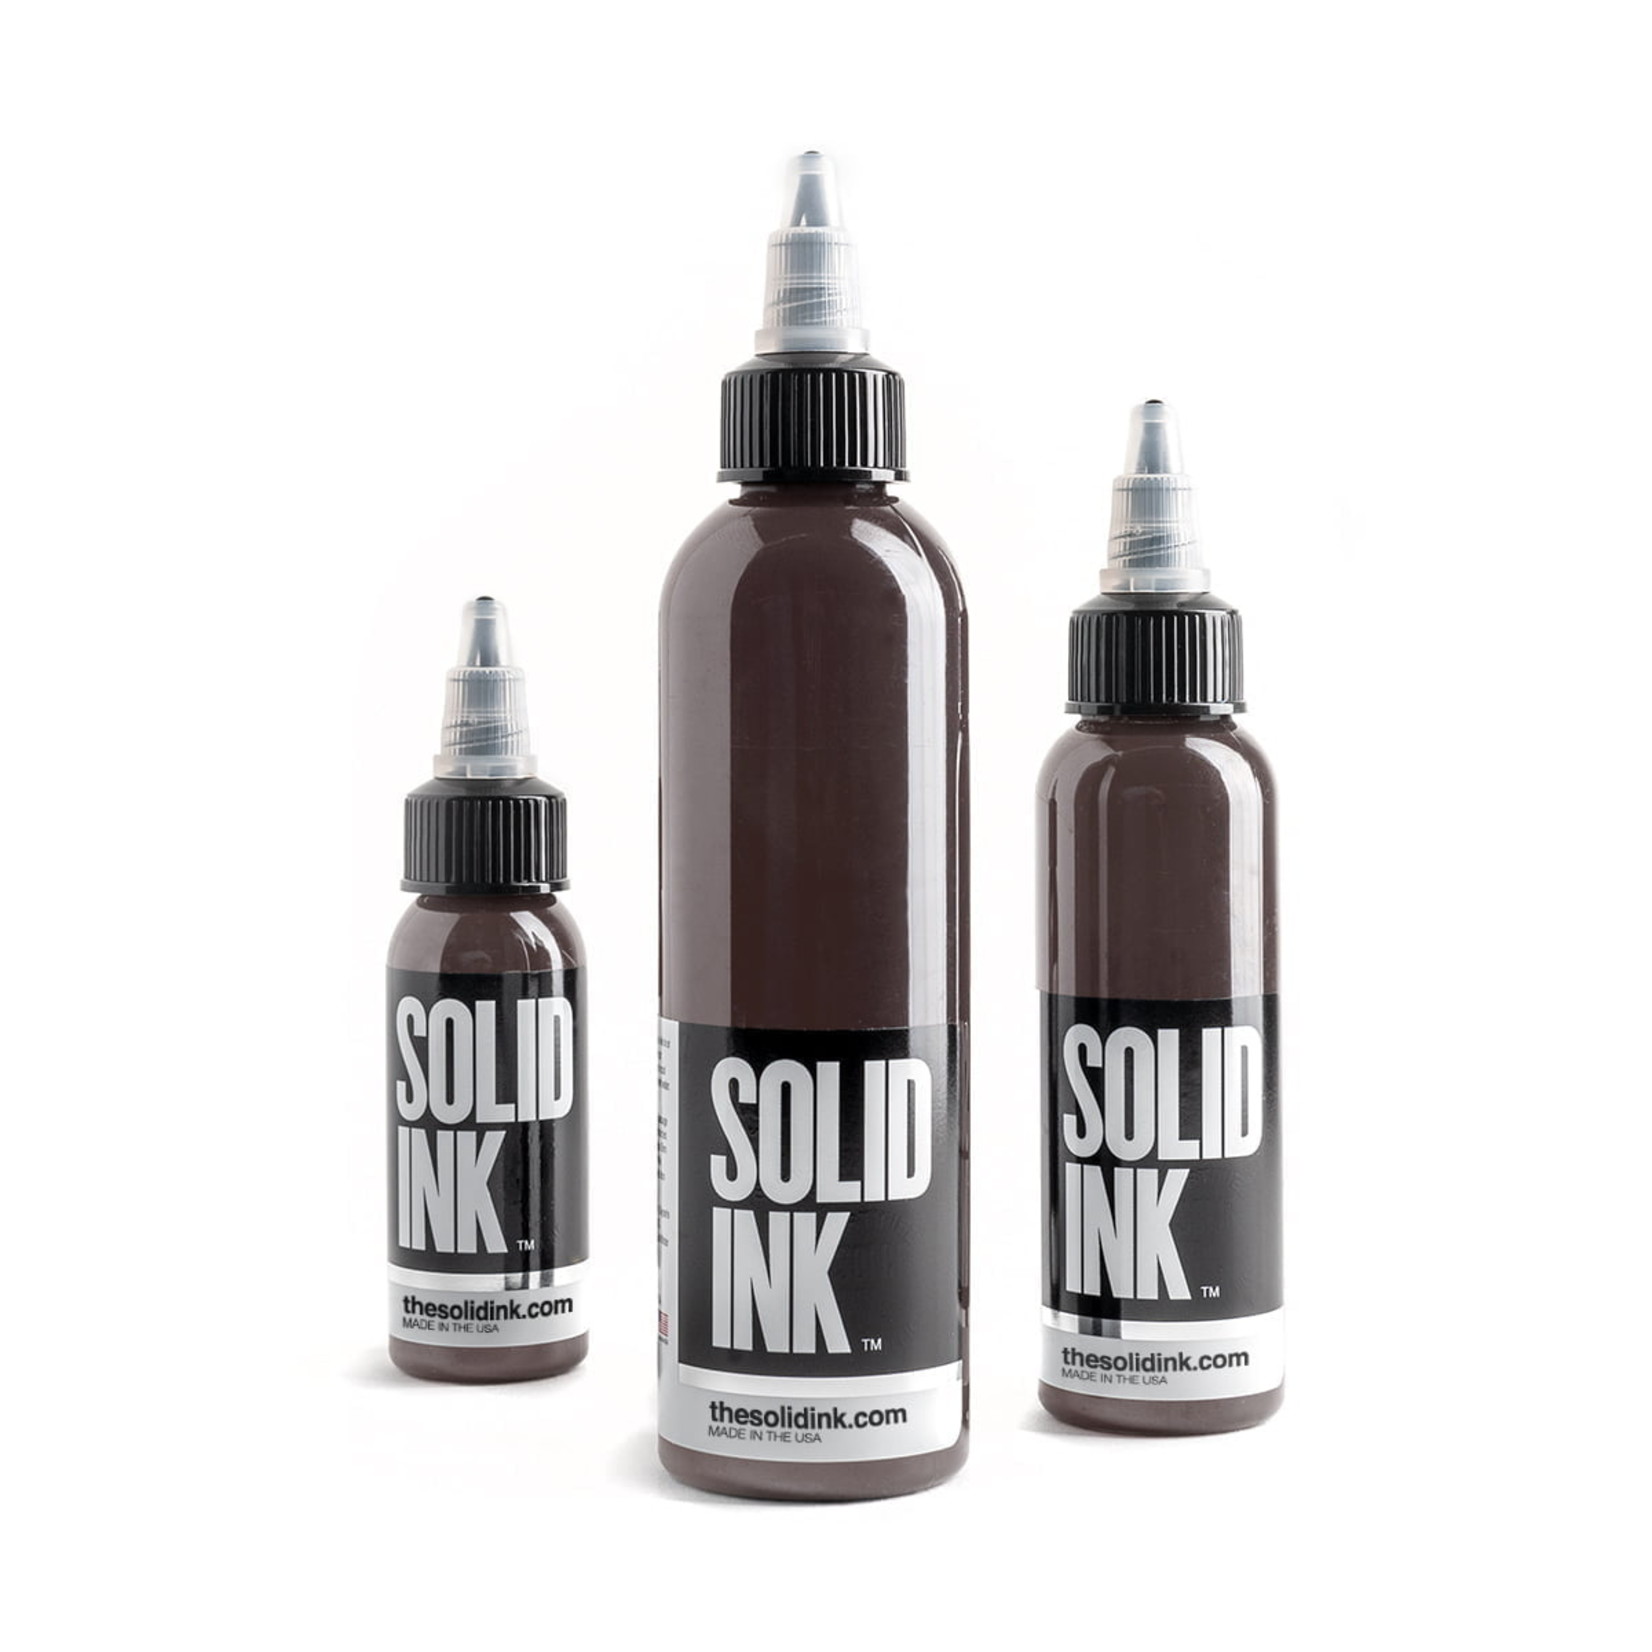 SOLID INK CHOCOLATE